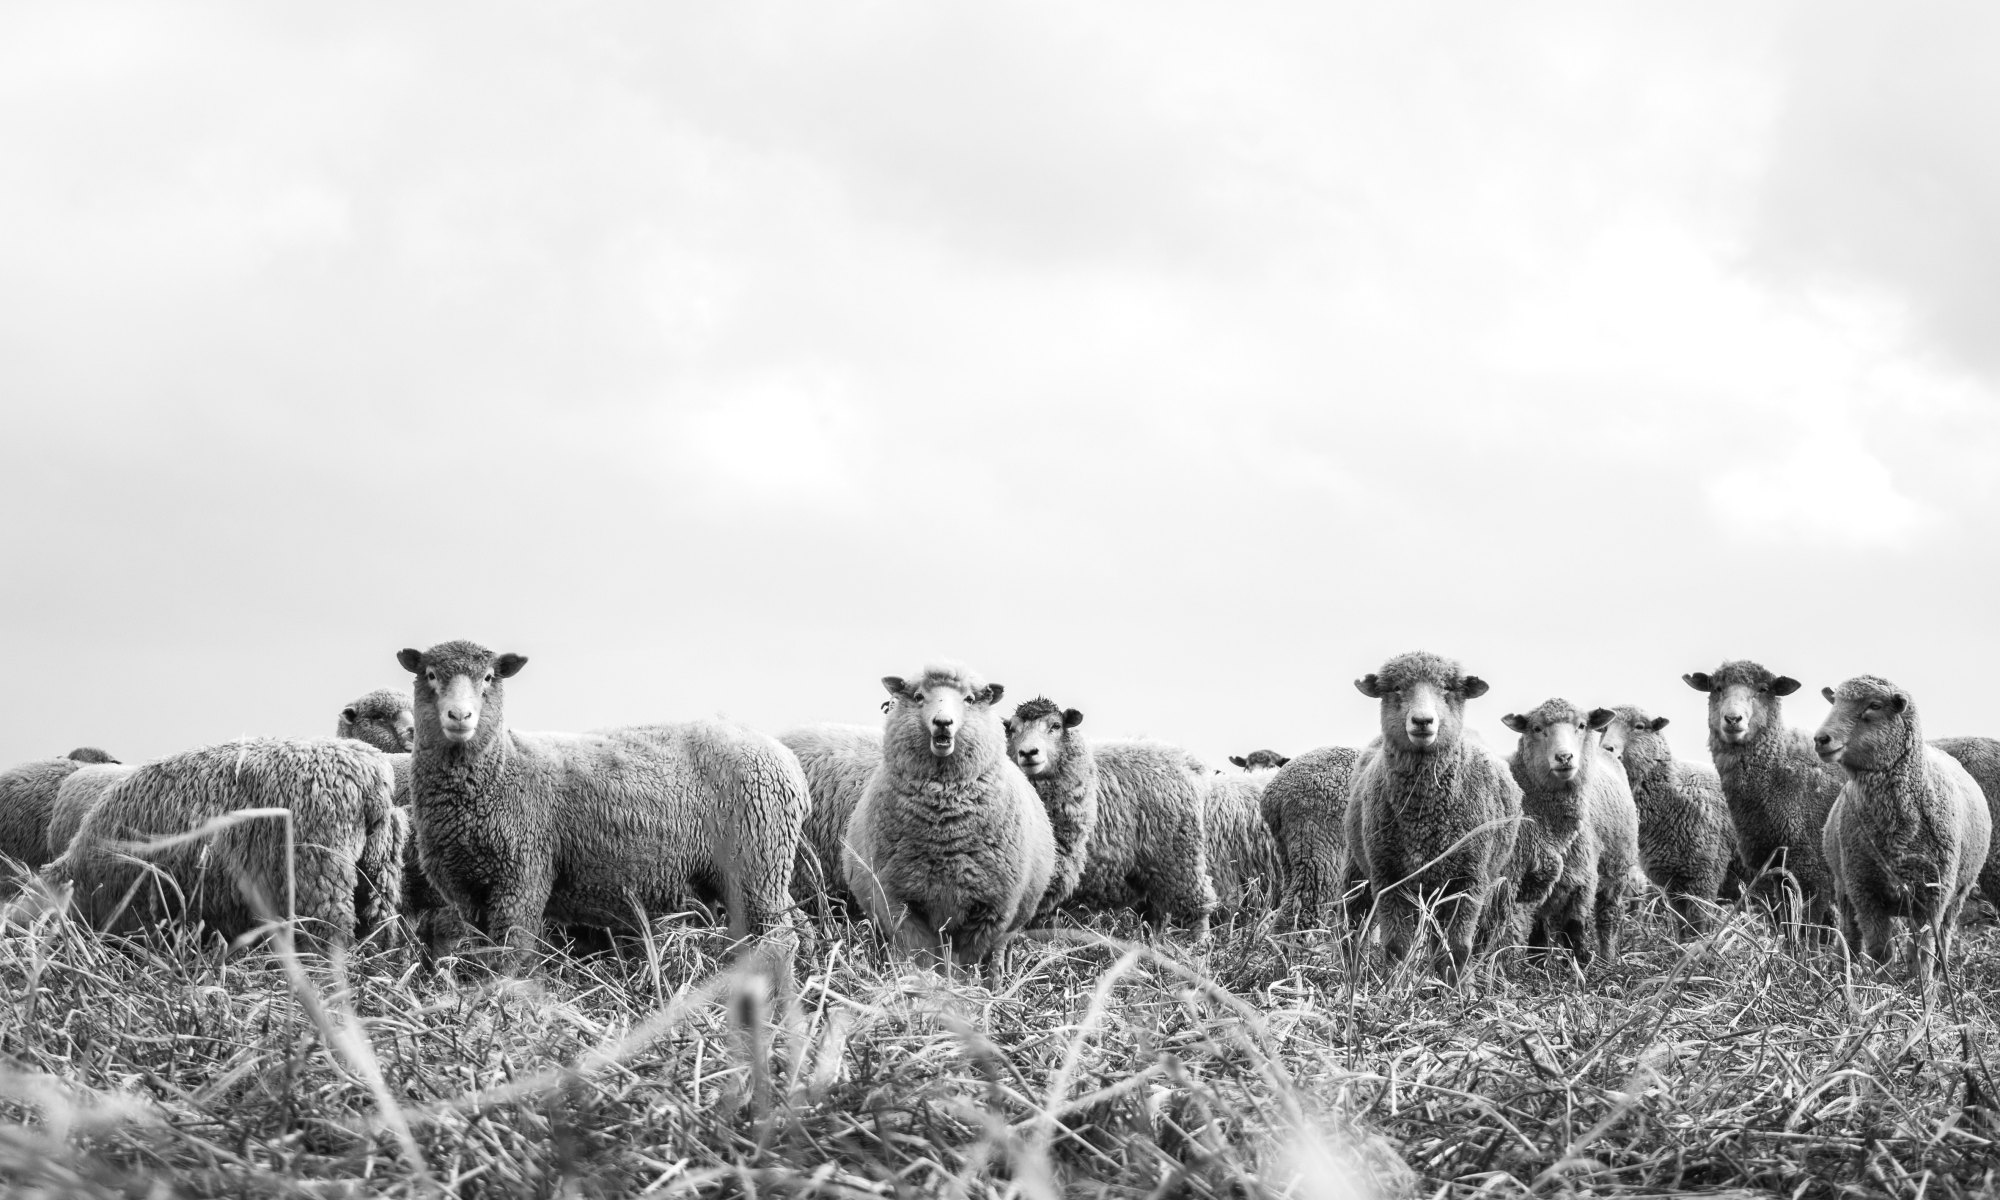 sheep on the outdoor. black and white photo.